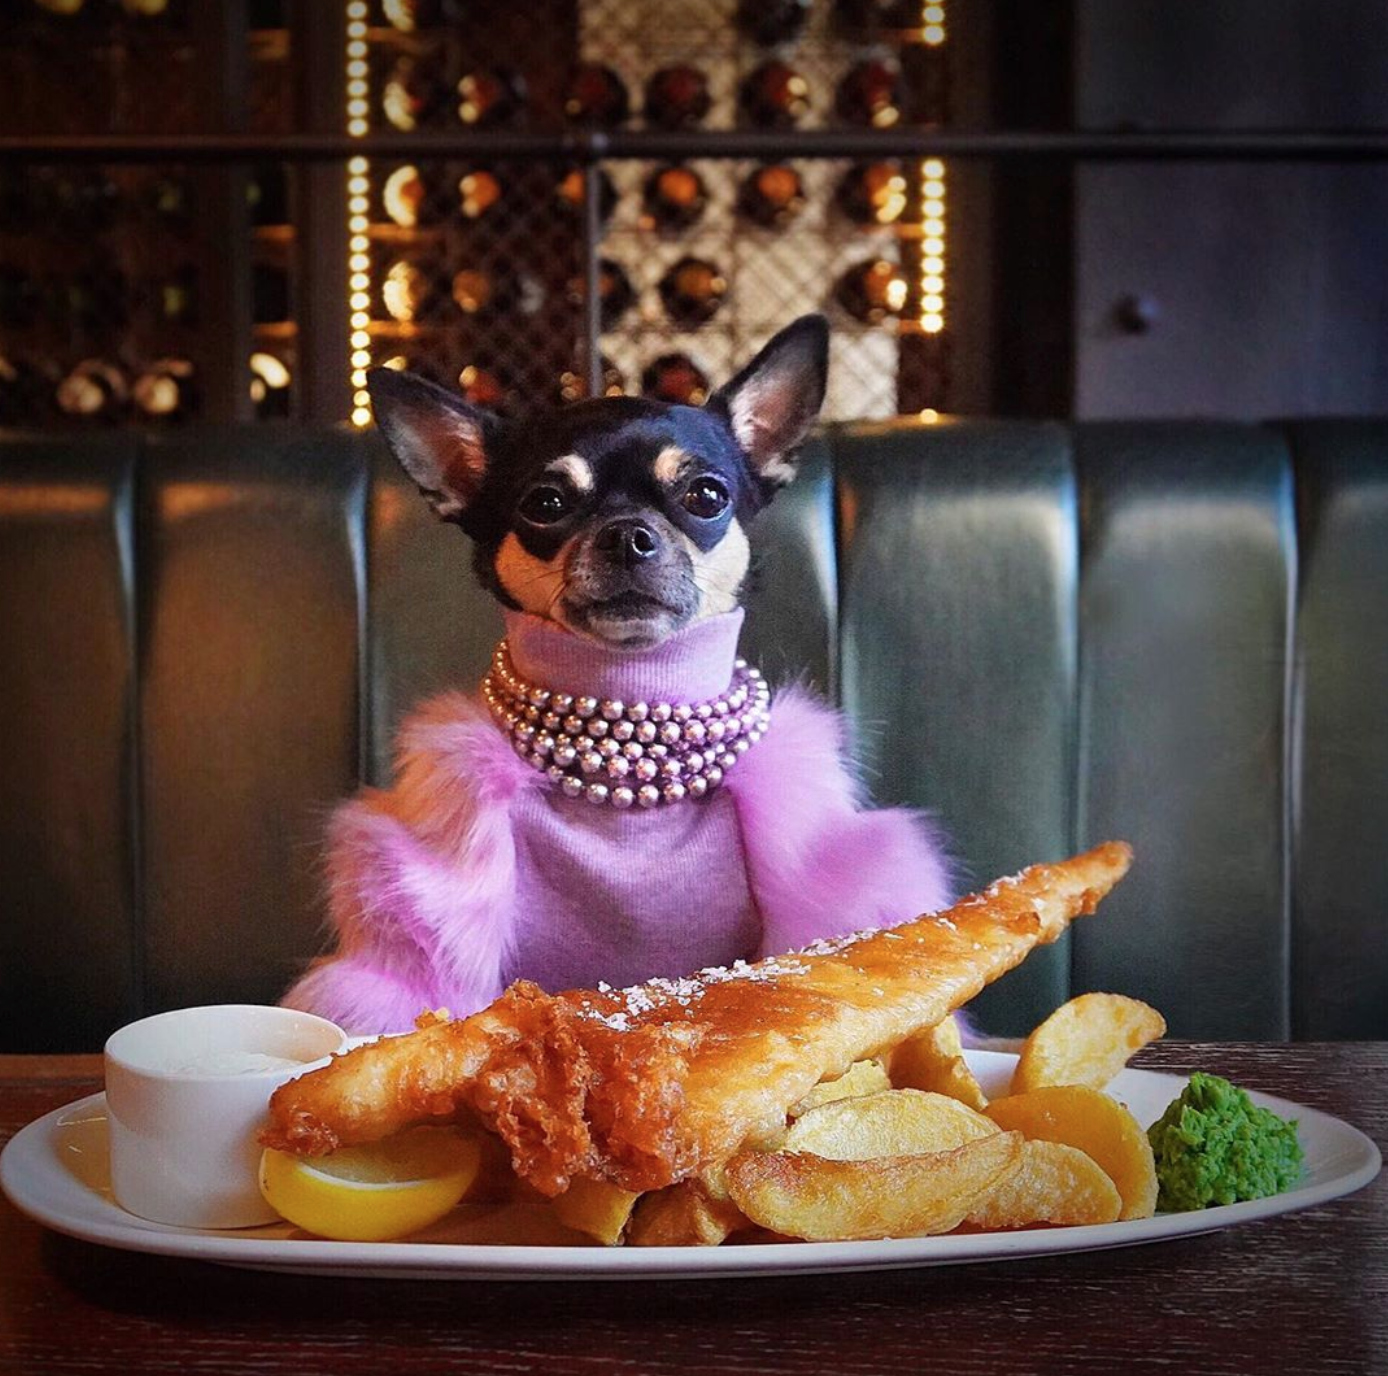 famous instagram dolly_pawton, the dog, sits at a restaurant table in London in front a big plate of fish and chips